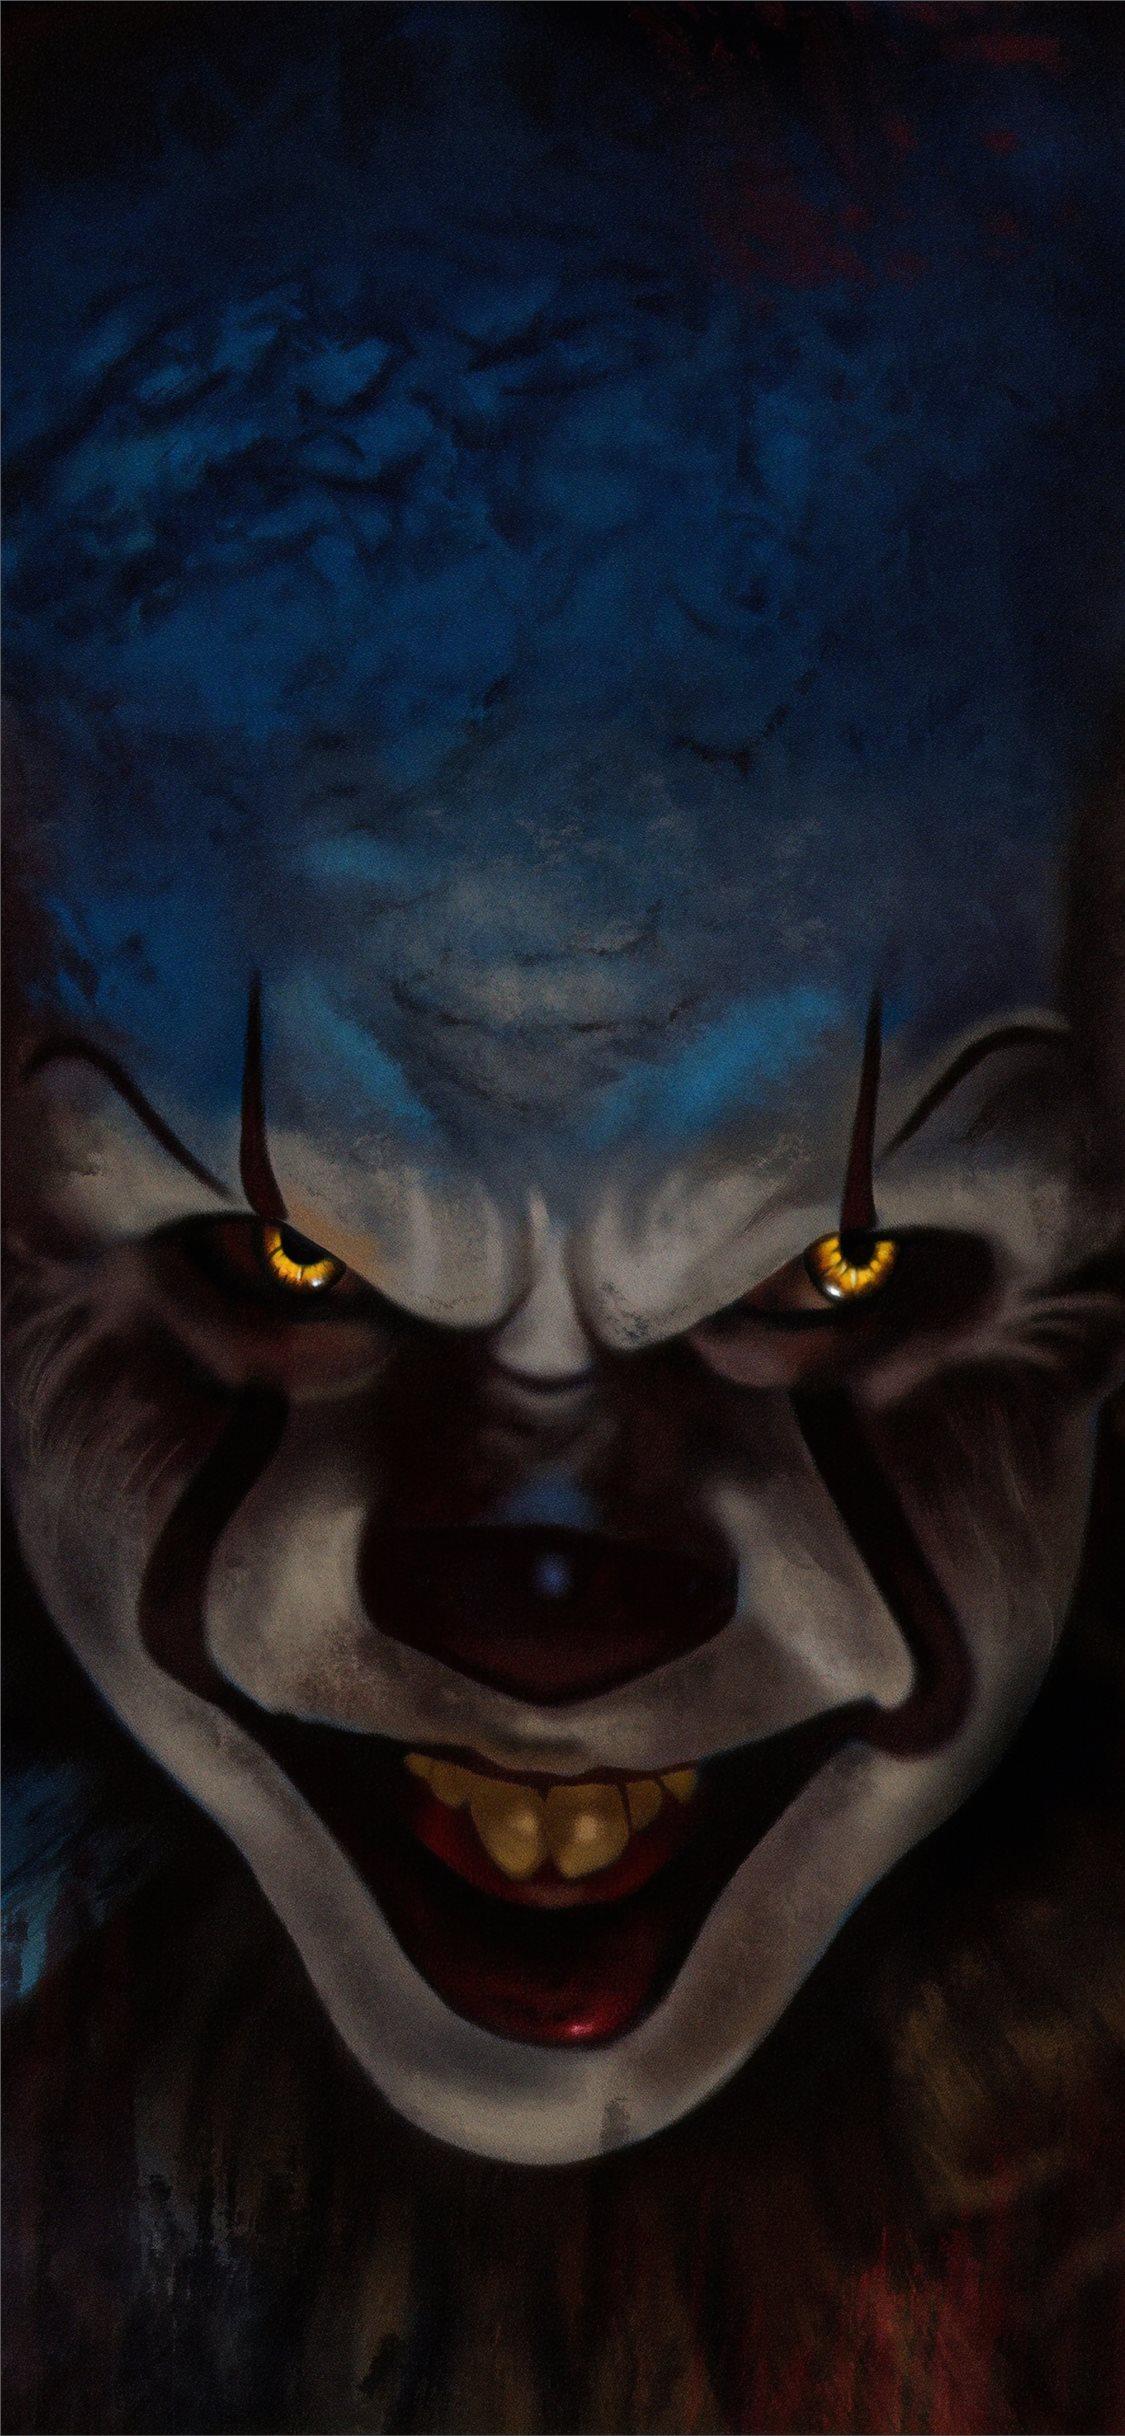 Pennywise iPhone Hd Wallpapers - Wallpaper Cave